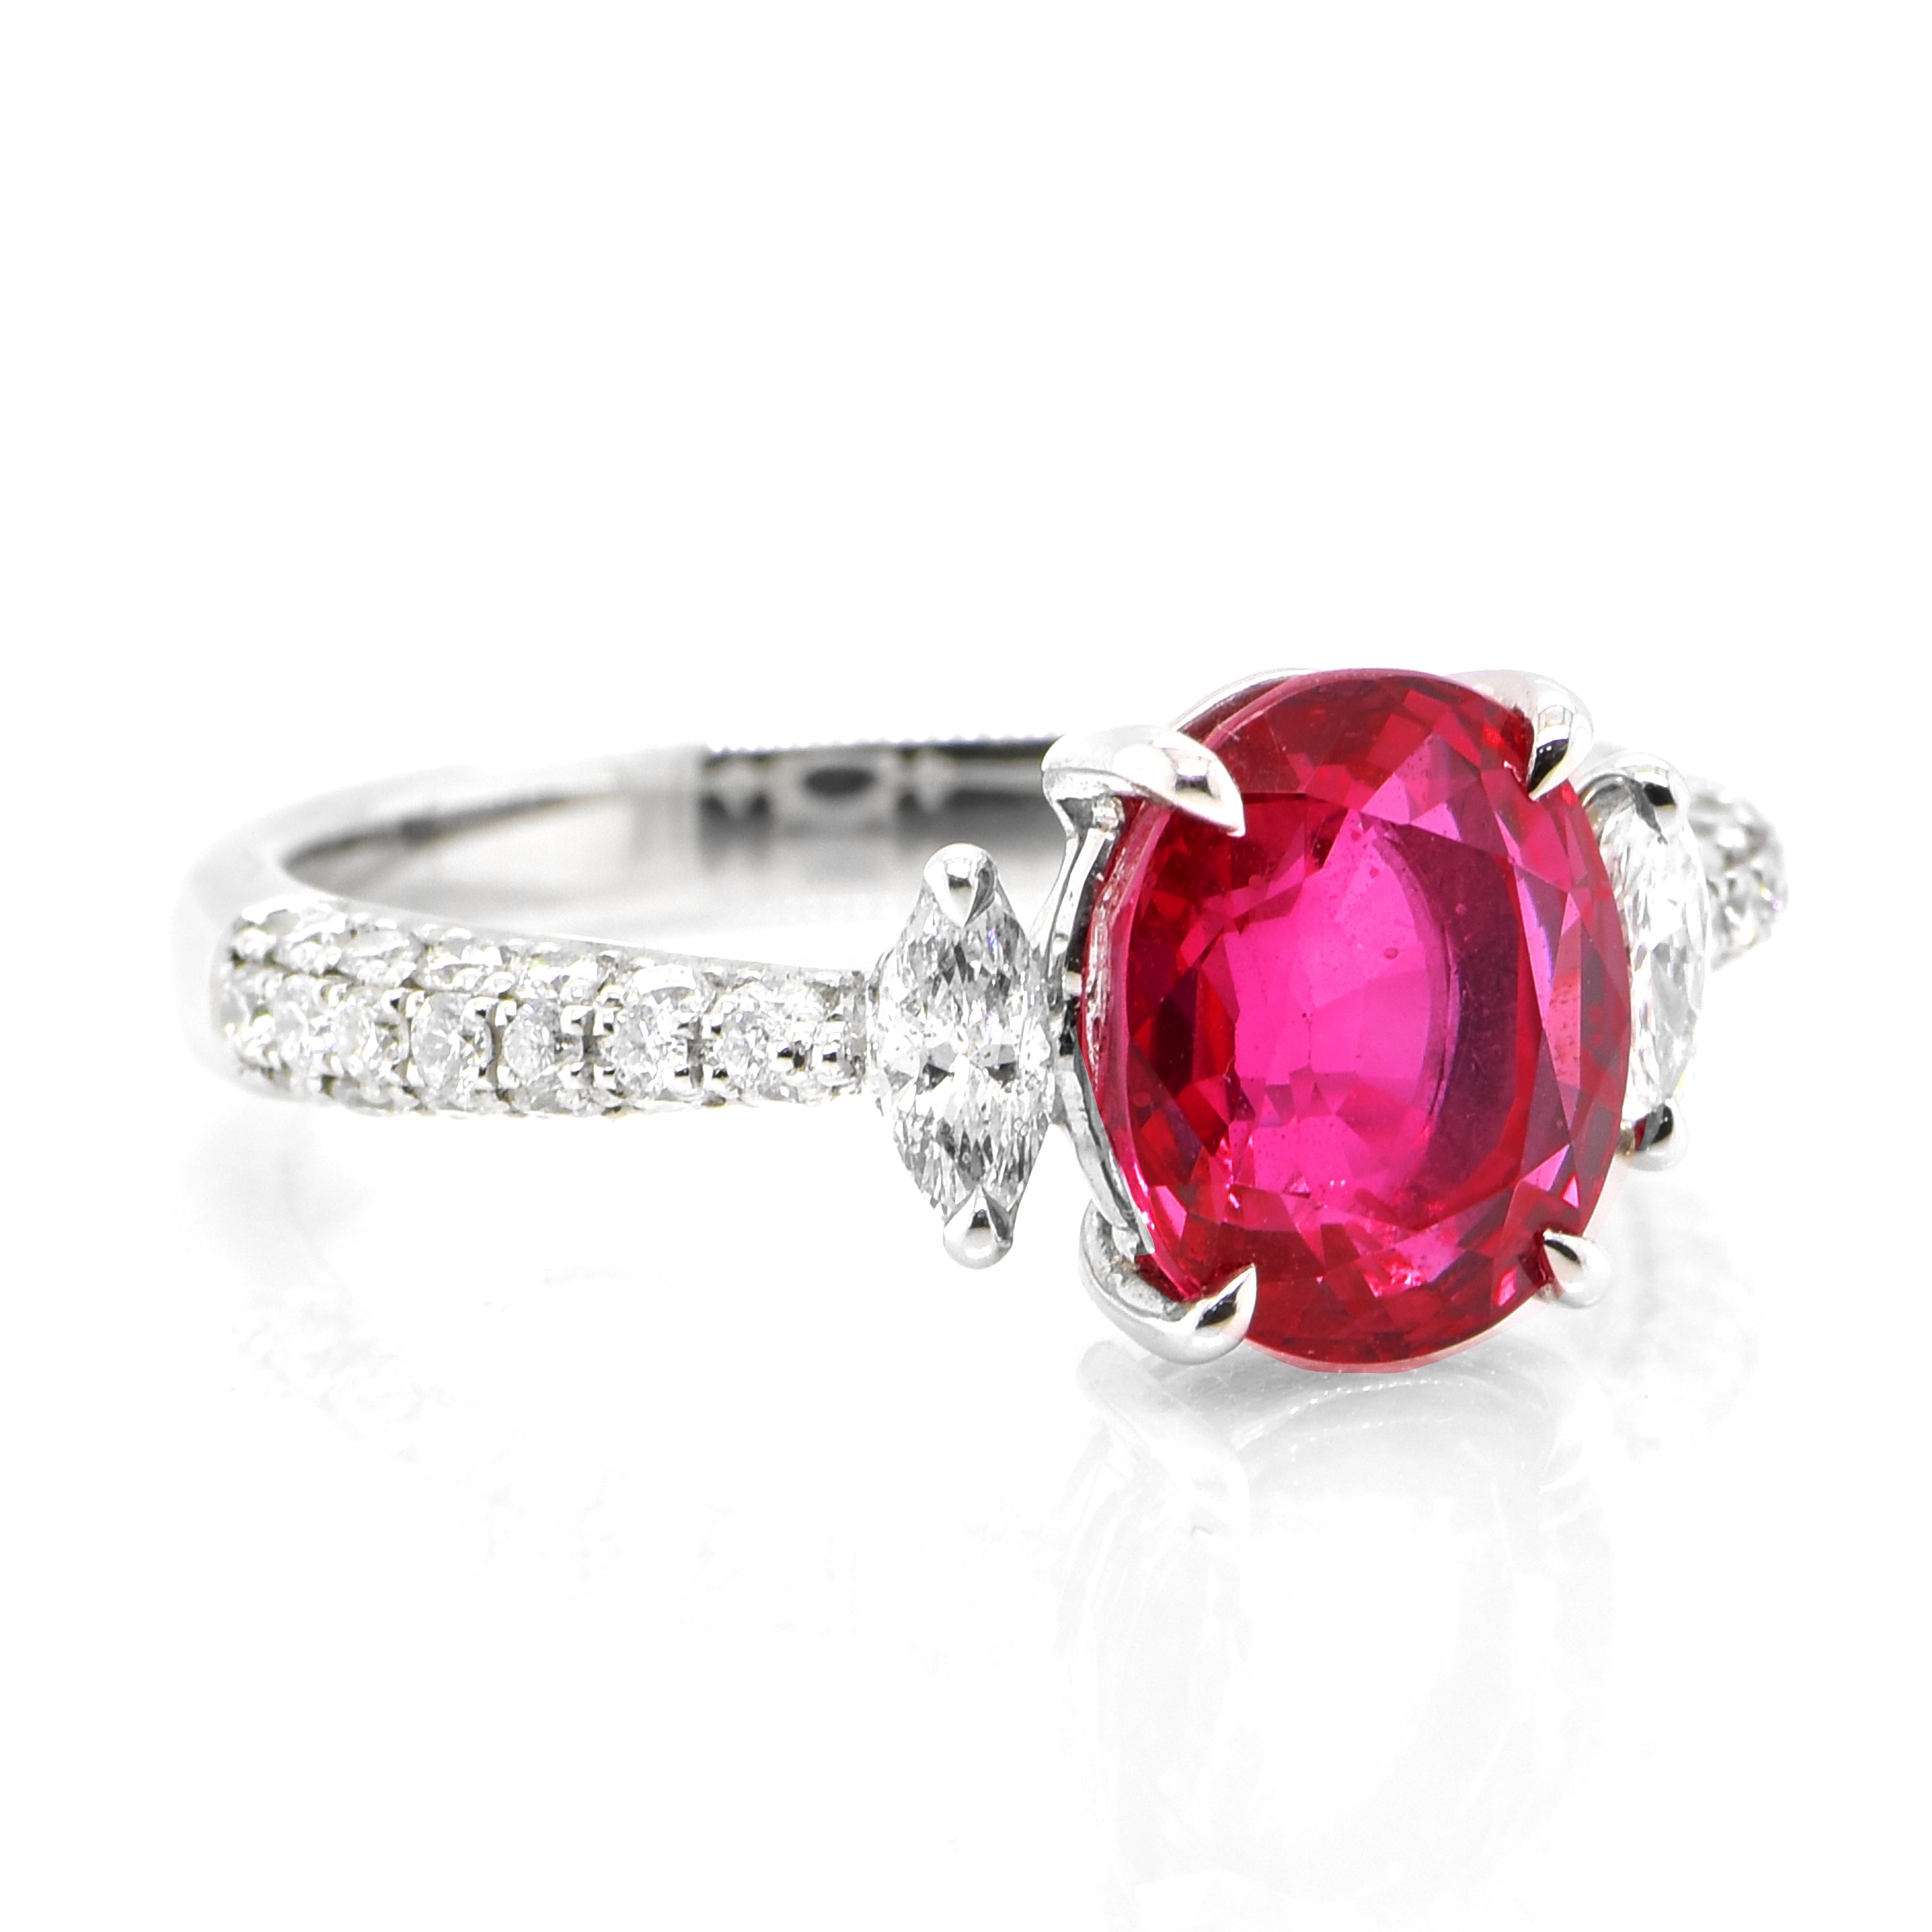 Modern GIA Certified 3.17 Carat Siam Ruby and Diamond Cocktail Ring Made in Platinum For Sale